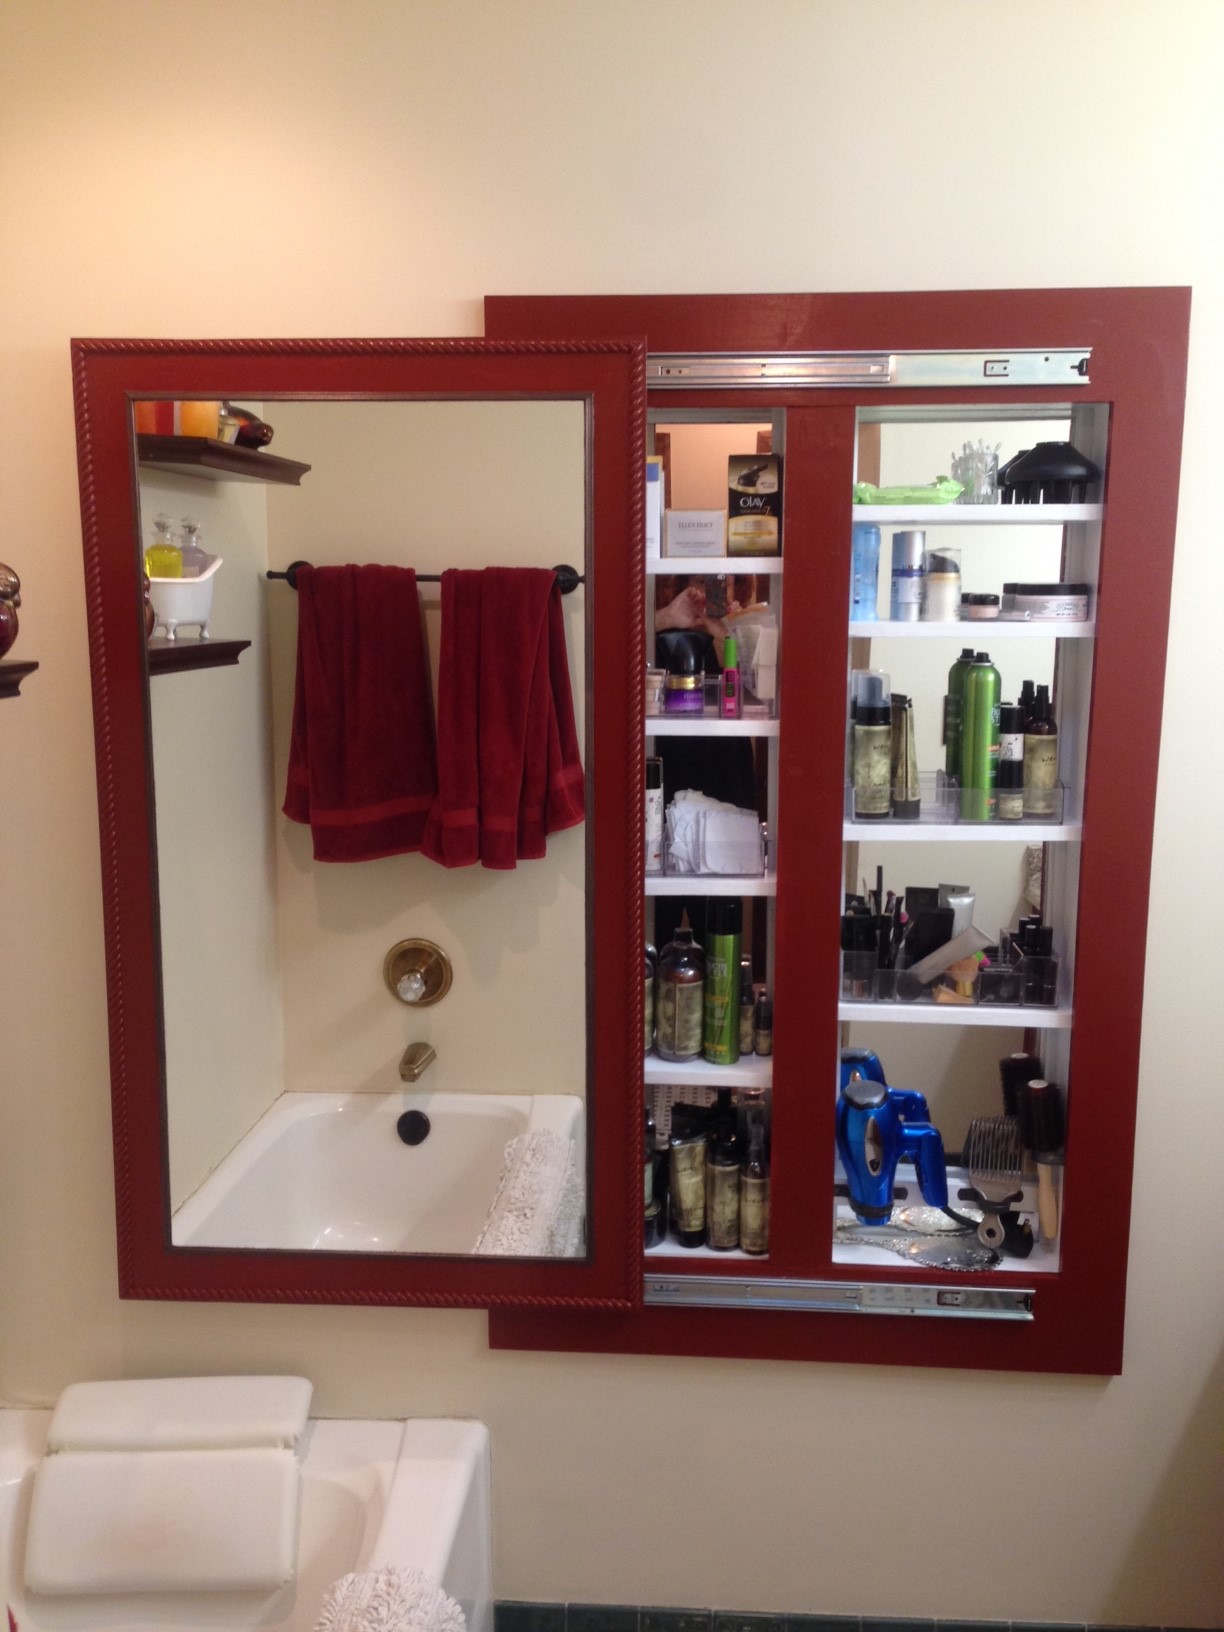 20+ Built-in Bathroom Storage Ideas and Inspiration that Will Save